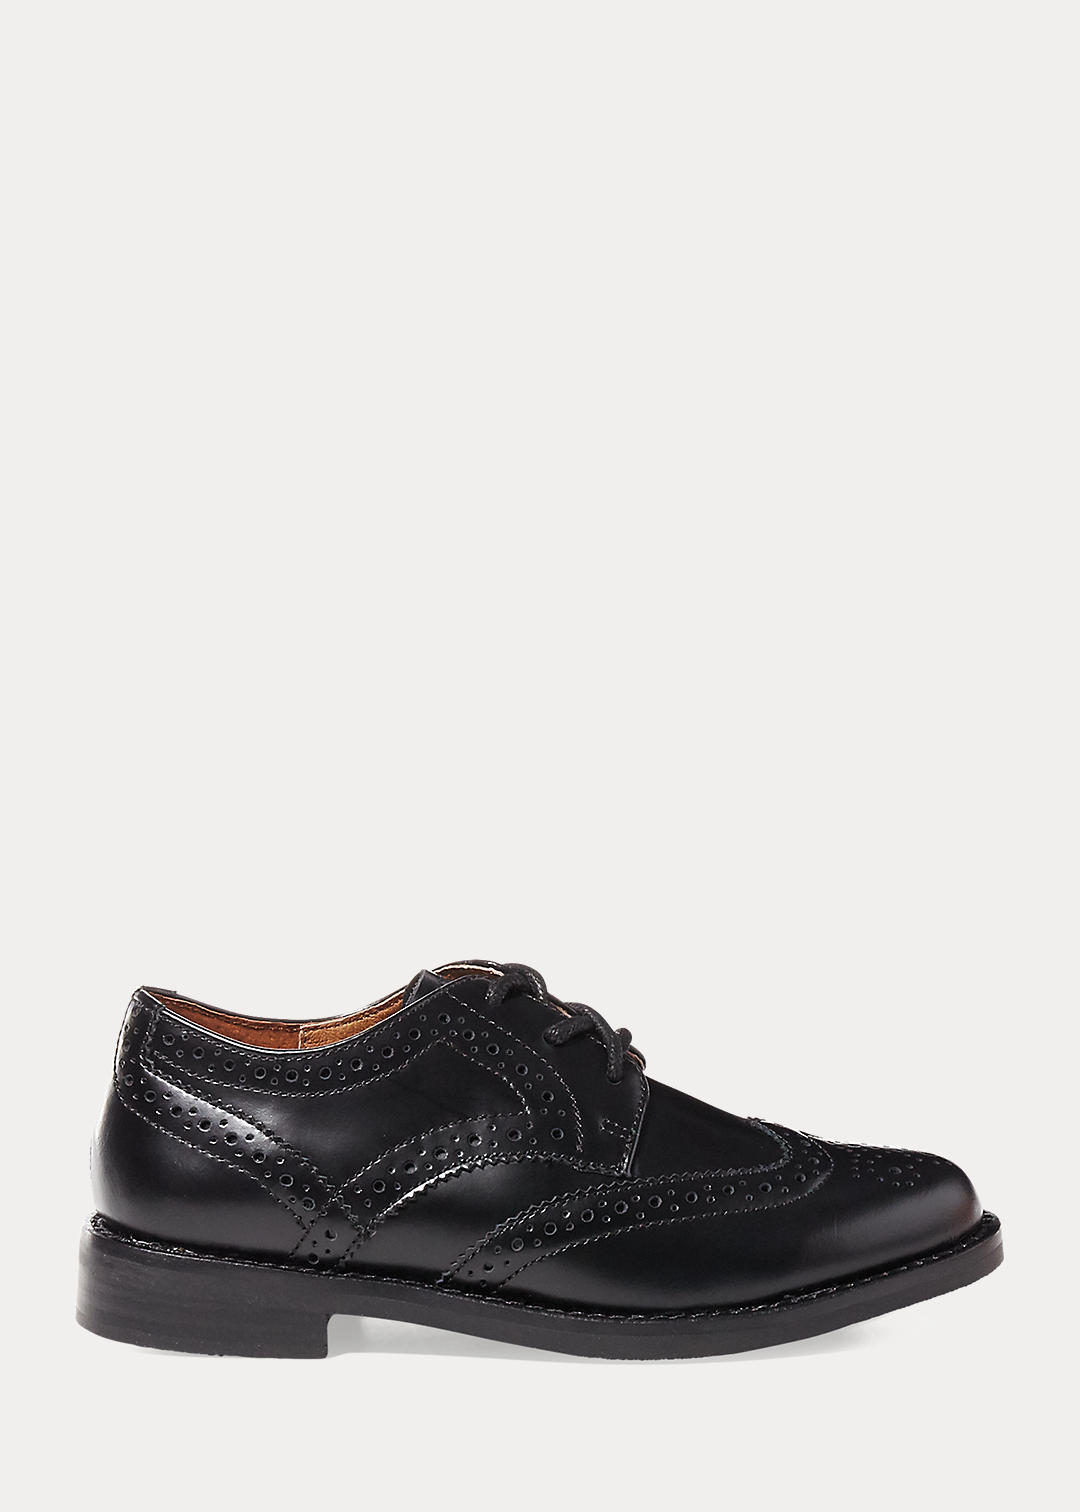 BOYS 1.5-6 YEARS Leather Wingtip Oxford Shoe 2